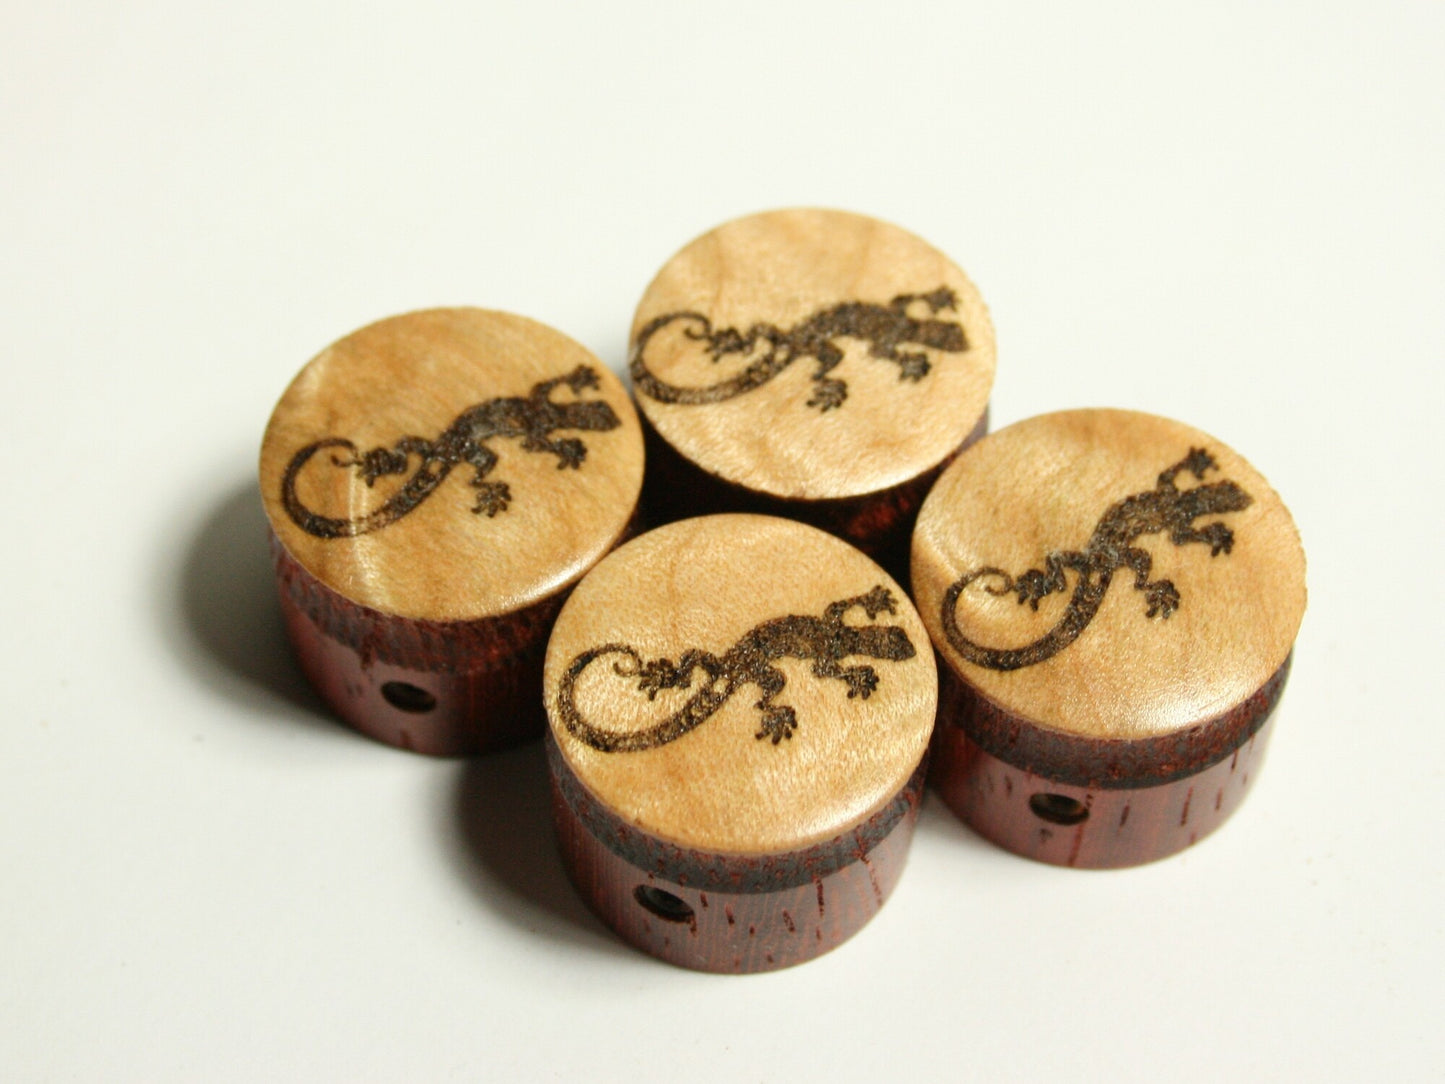 Set of 4 Laser Etched Padauk Guitar Knobs with Figured Maple Cap (7/8 dia x 5/8 height)